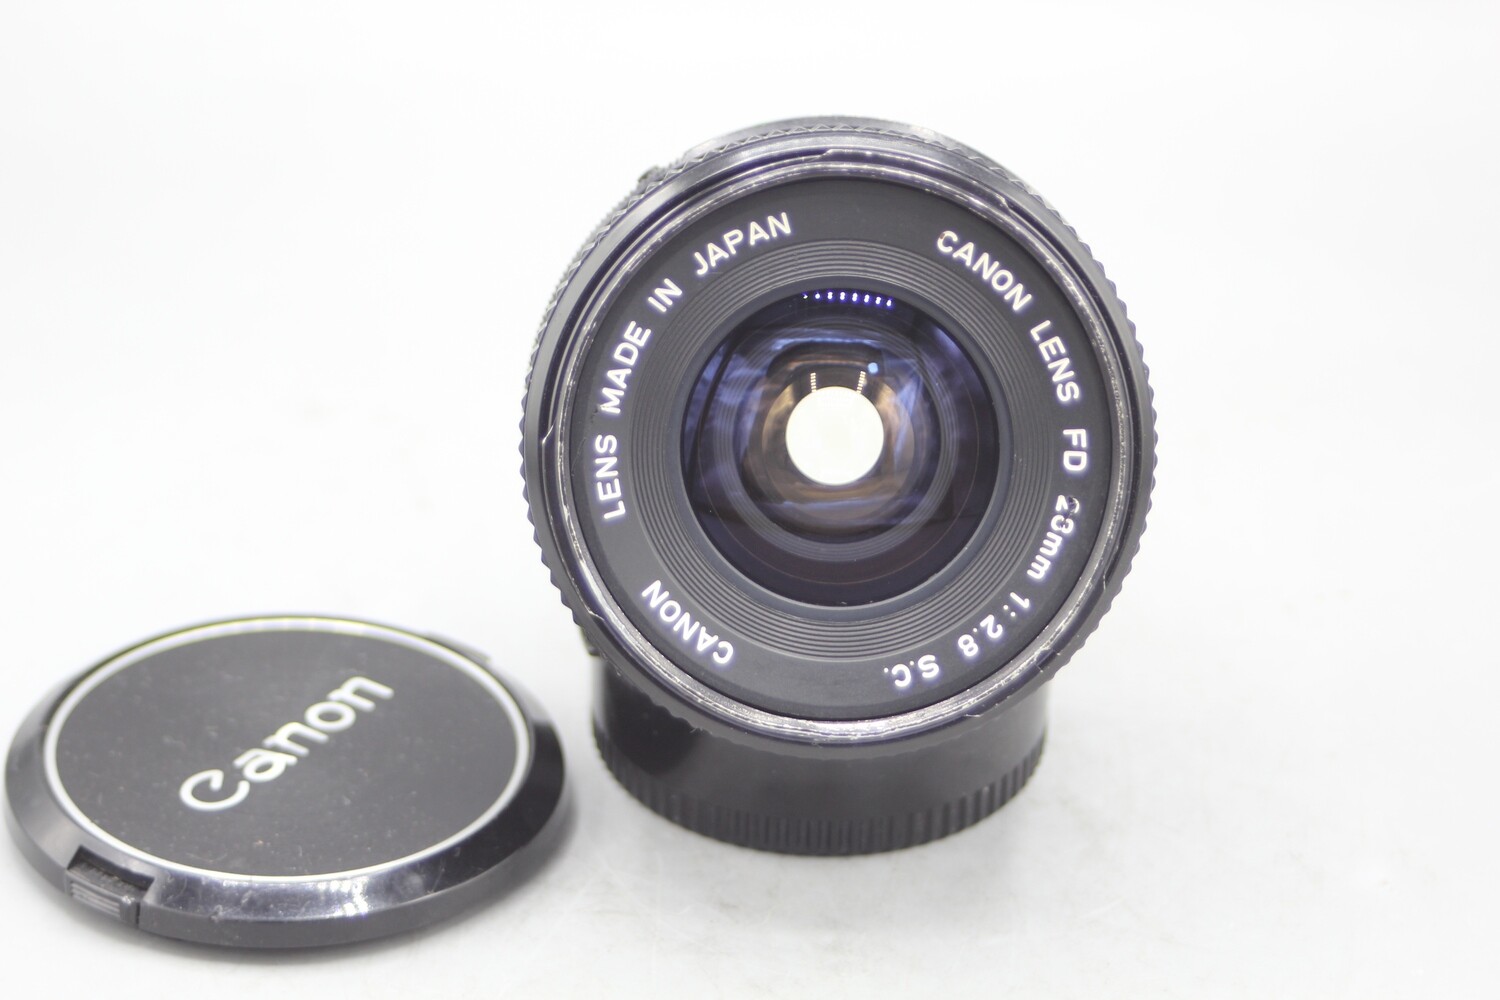 Canon FD 28mm 1:2.8 Lens for Canon SLR cameras Serviced & Tested